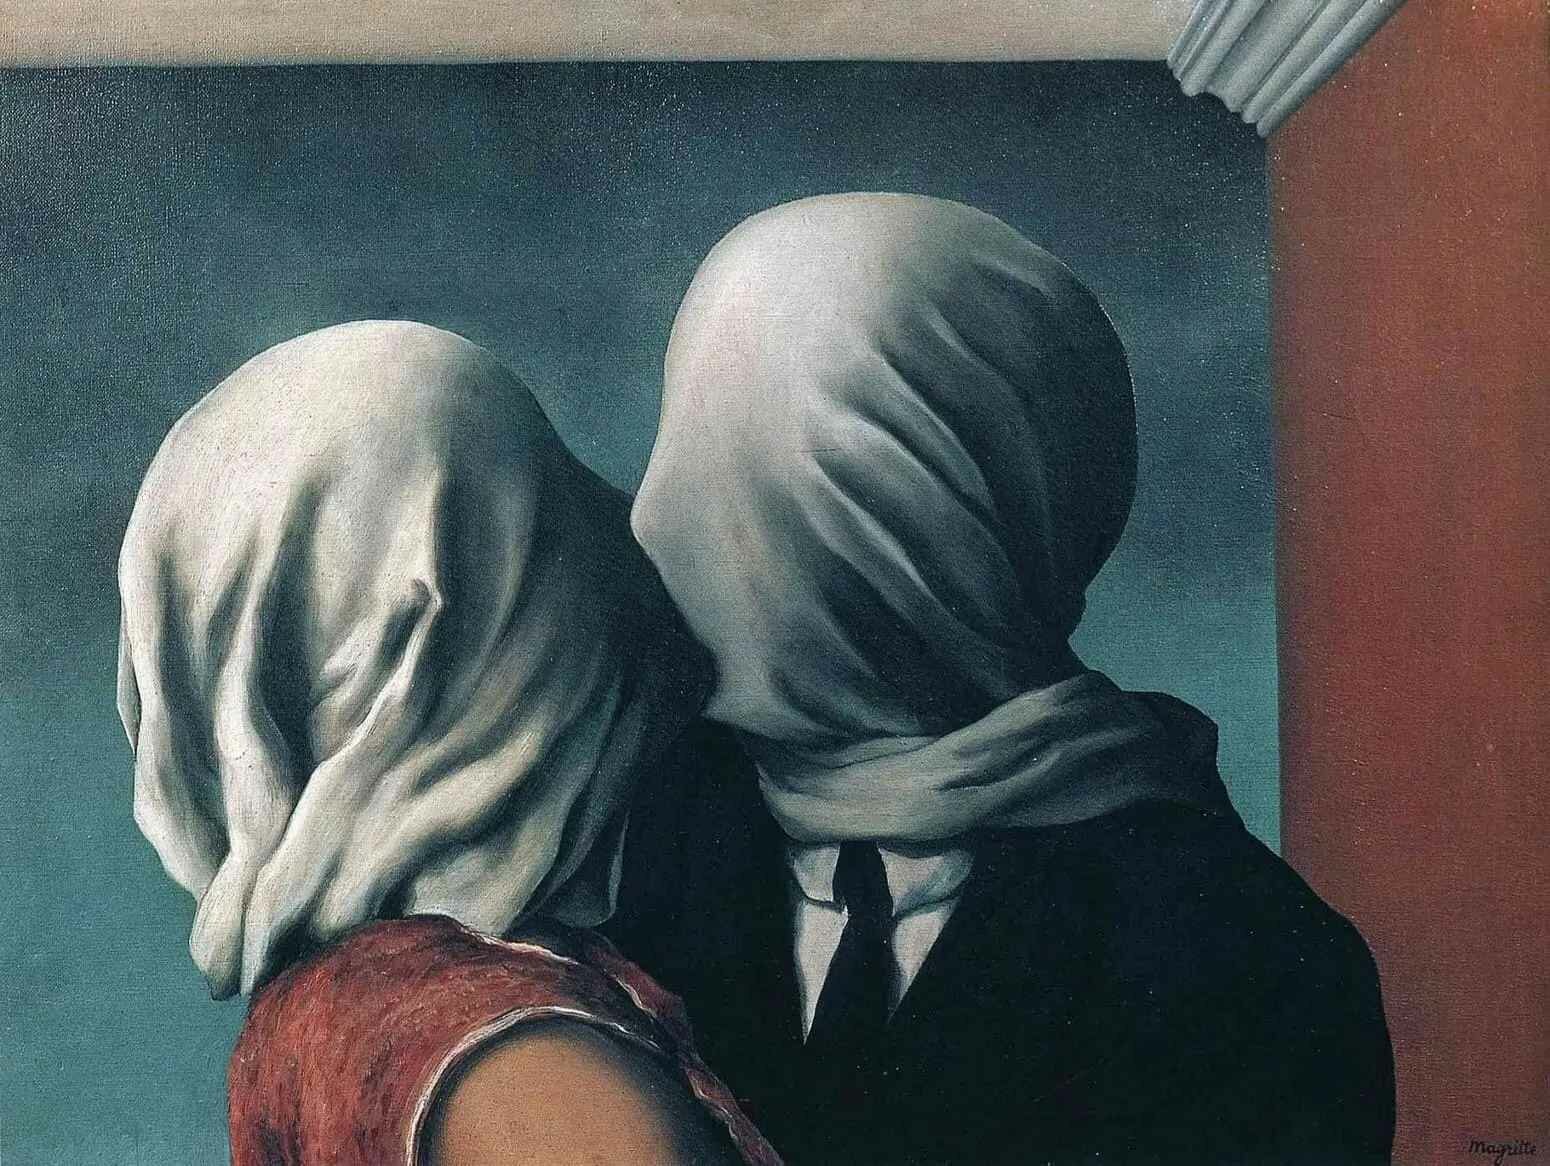 Painting "Lovers", Rene Magritte - the Meaning and Description of the Painting